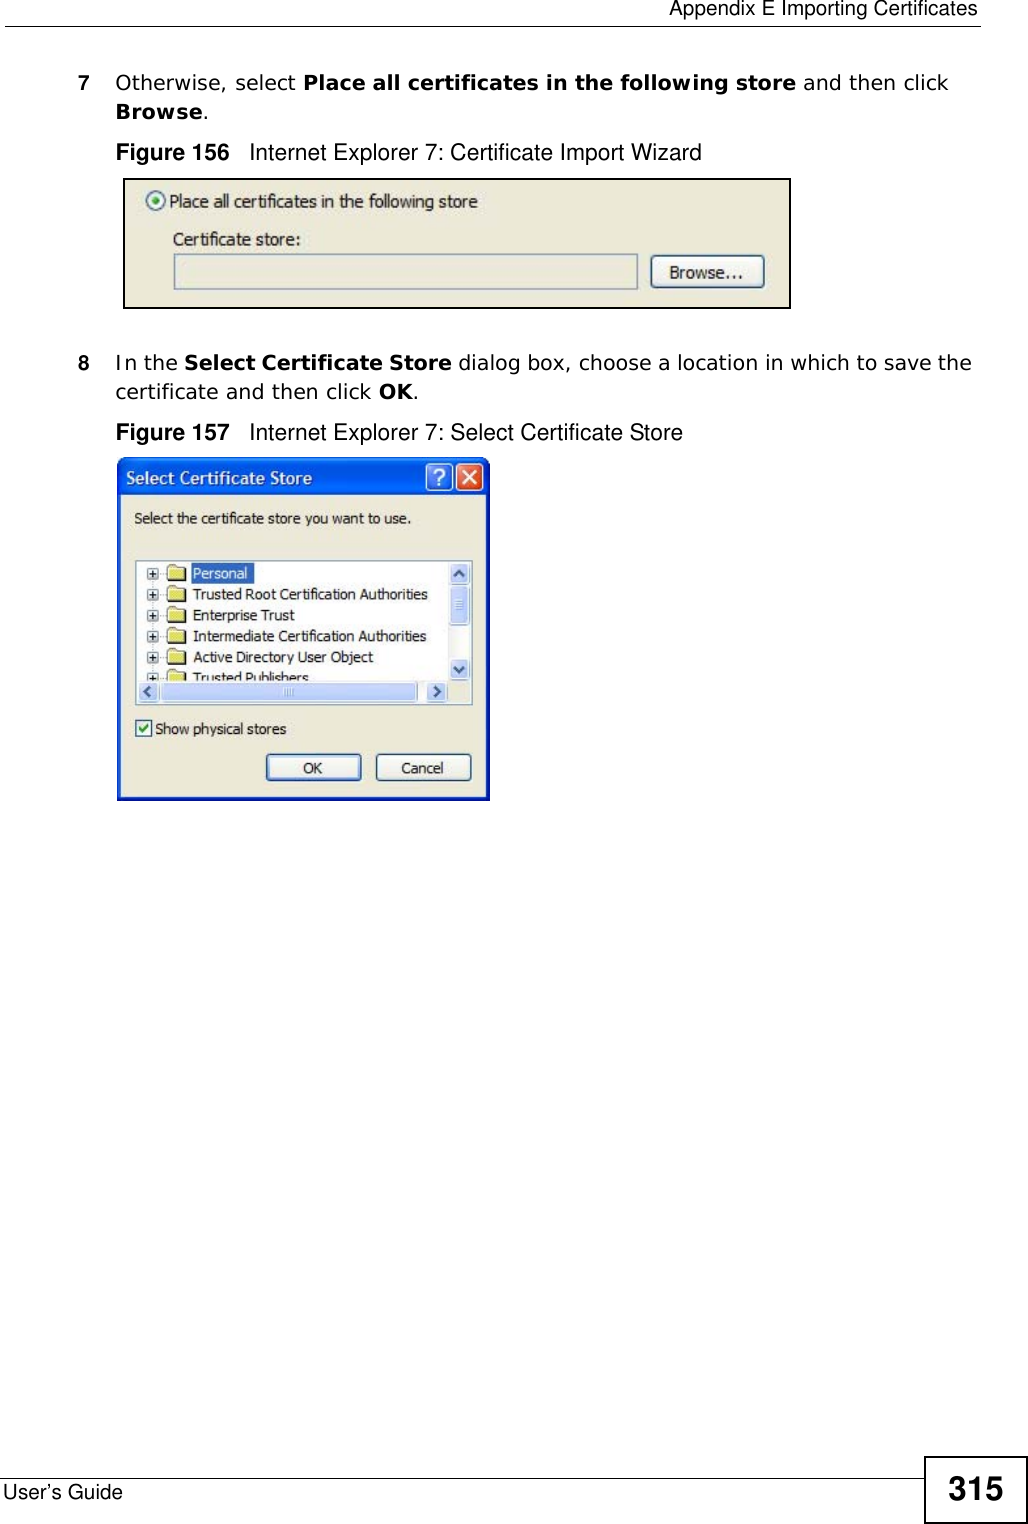  Appendix E Importing CertificatesUser’s Guide 3157Otherwise, select Place all certificates in the following store and then click Browse.Figure 156   Internet Explorer 7: Certificate Import Wizard8In the Select Certificate Store dialog box, choose a location in which to save the certificate and then click OK.Figure 157   Internet Explorer 7: Select Certificate Store